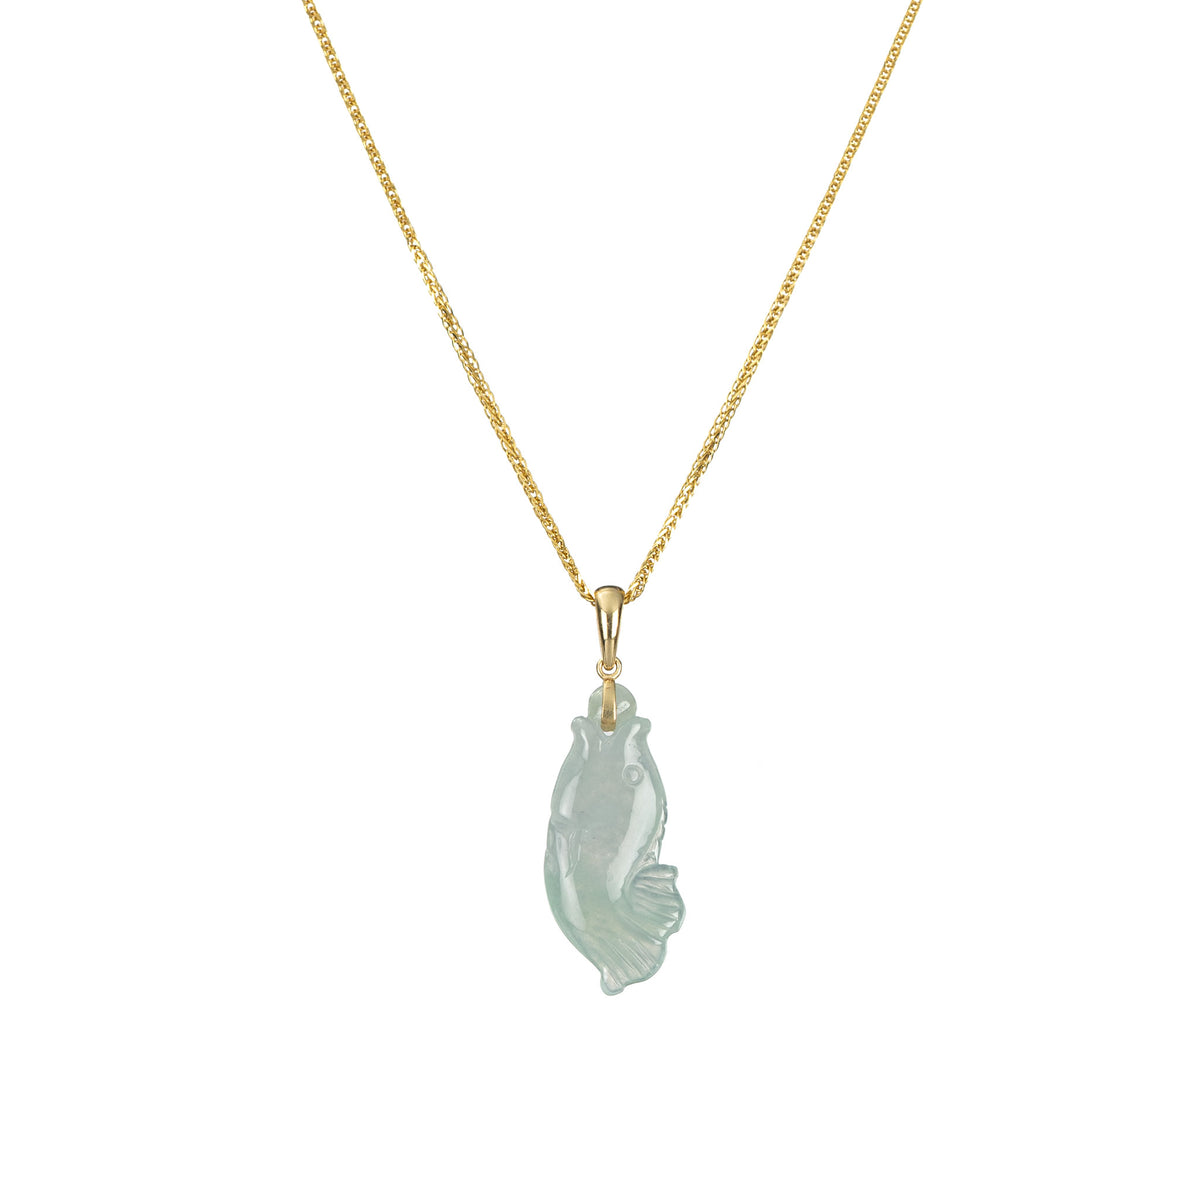 Highly Translucent Carved Jade Fish Necklace